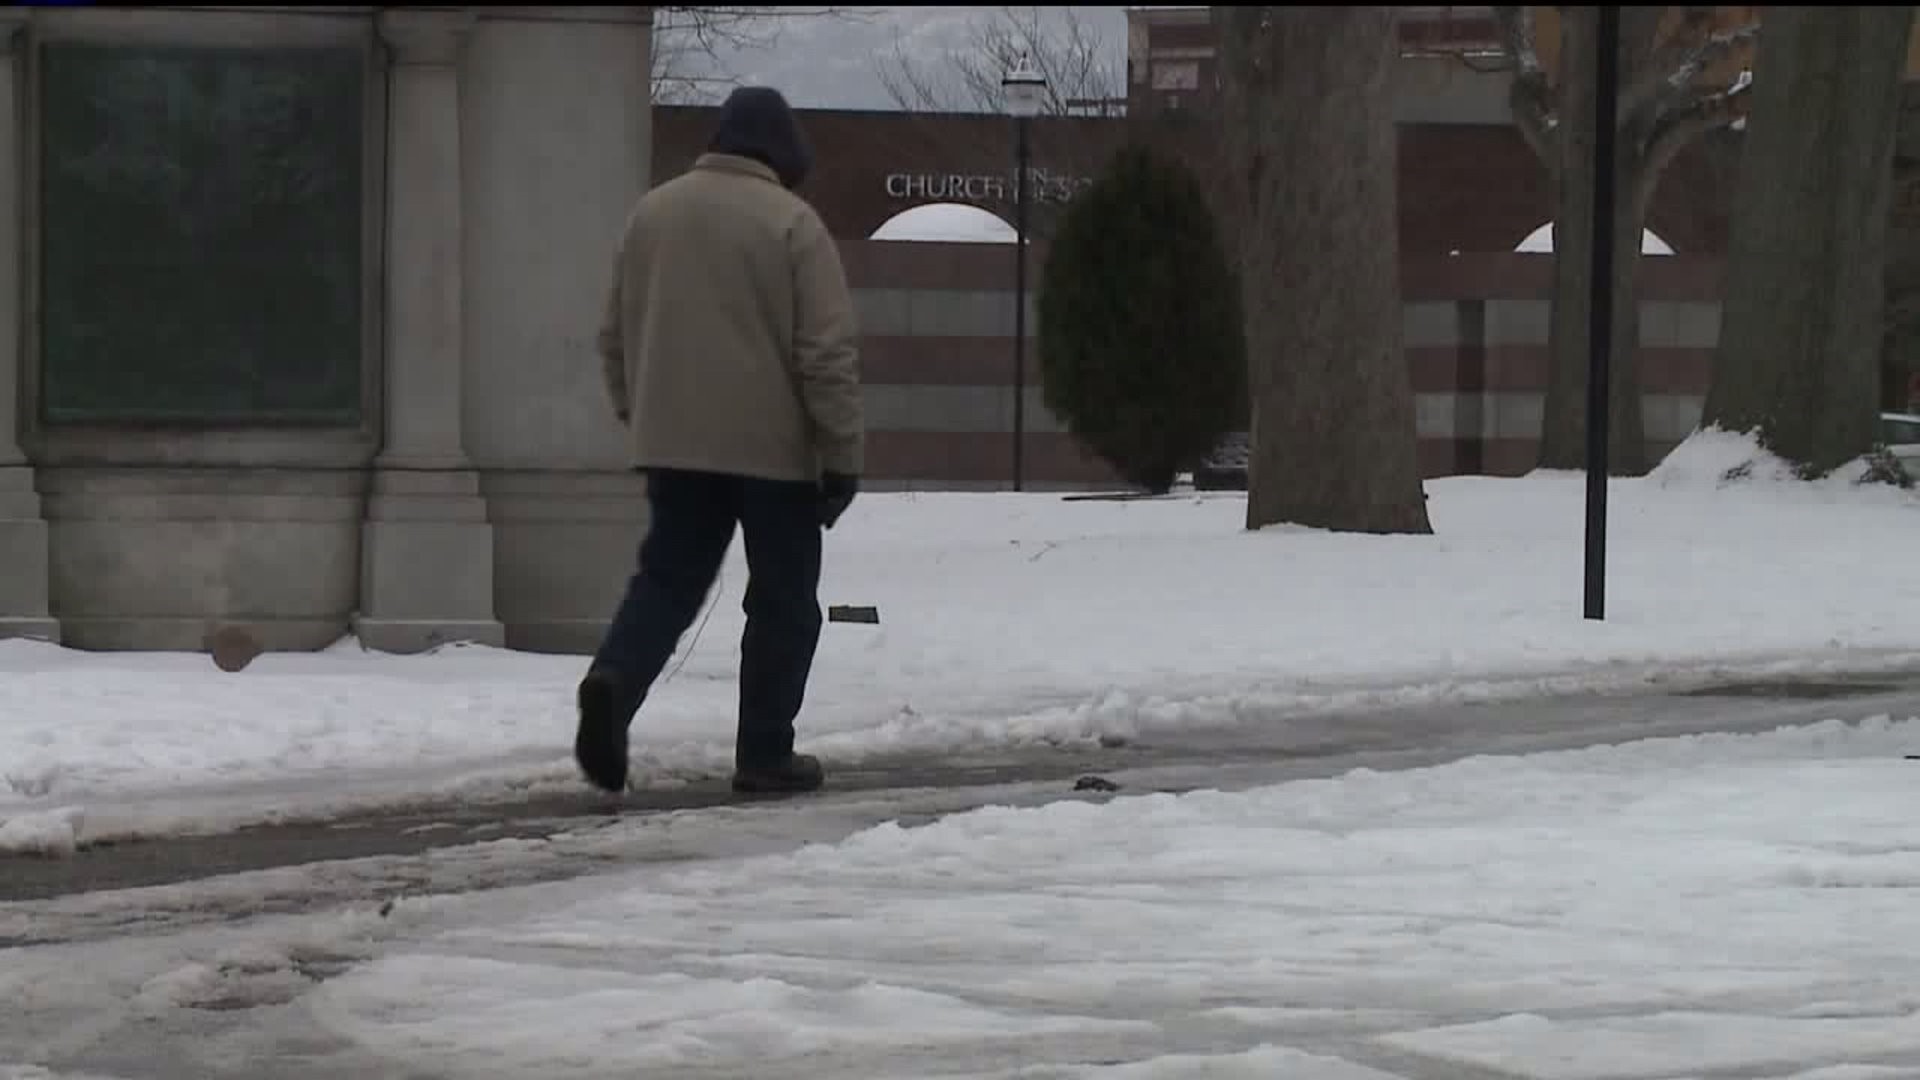 Icy Conditions Causing More Falls